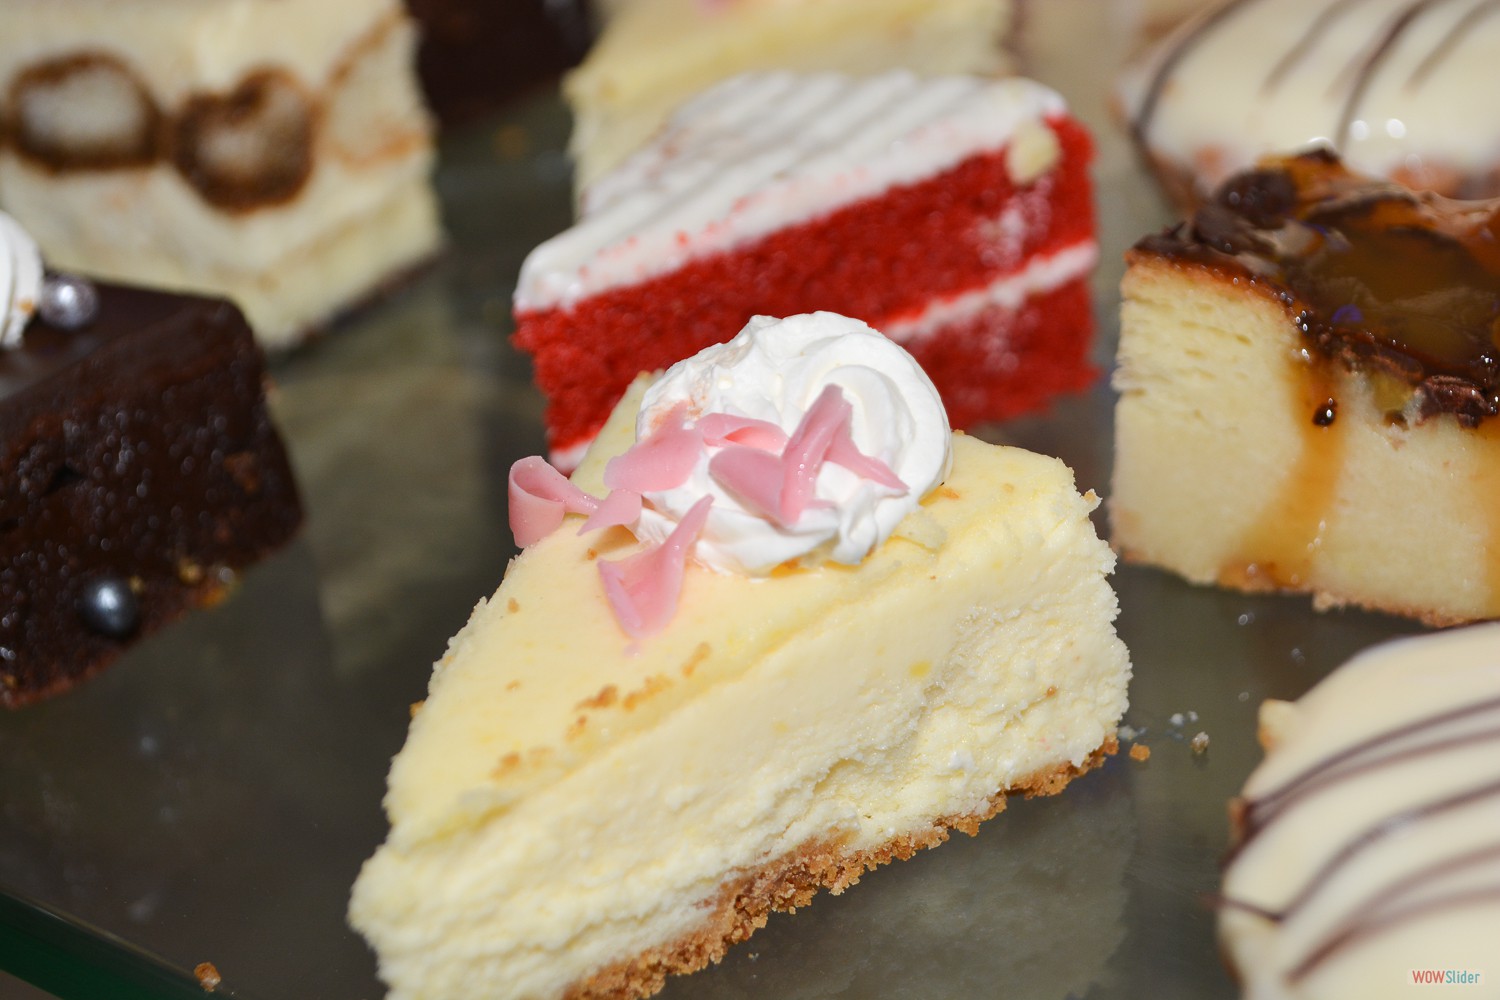 A tasty selection from the dessert bar!